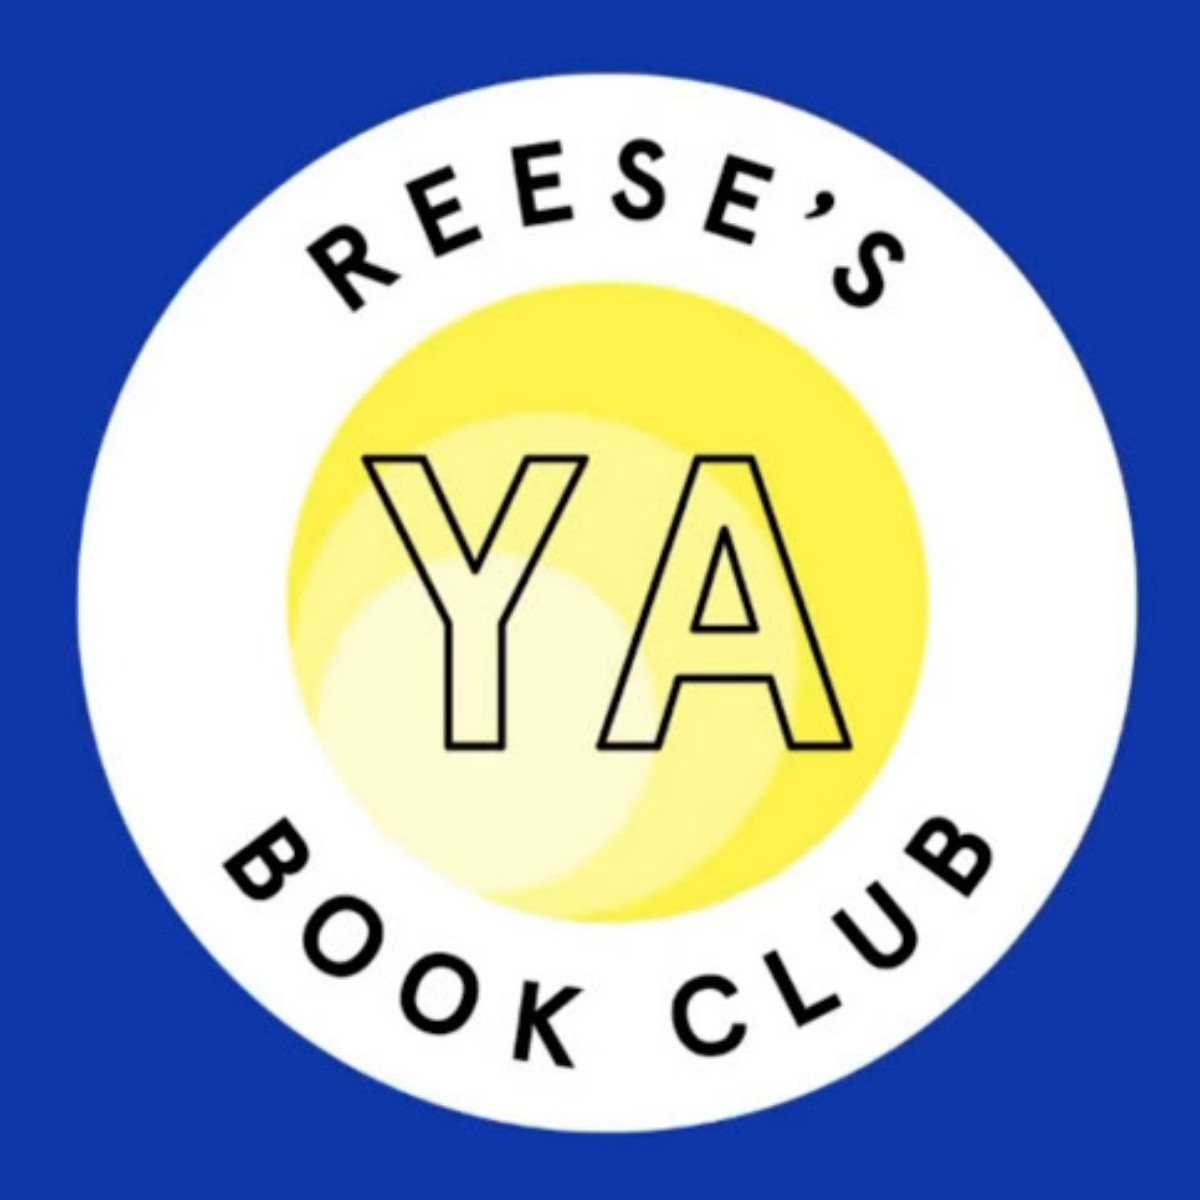 Reese's YA Book Club Books for Young Adults